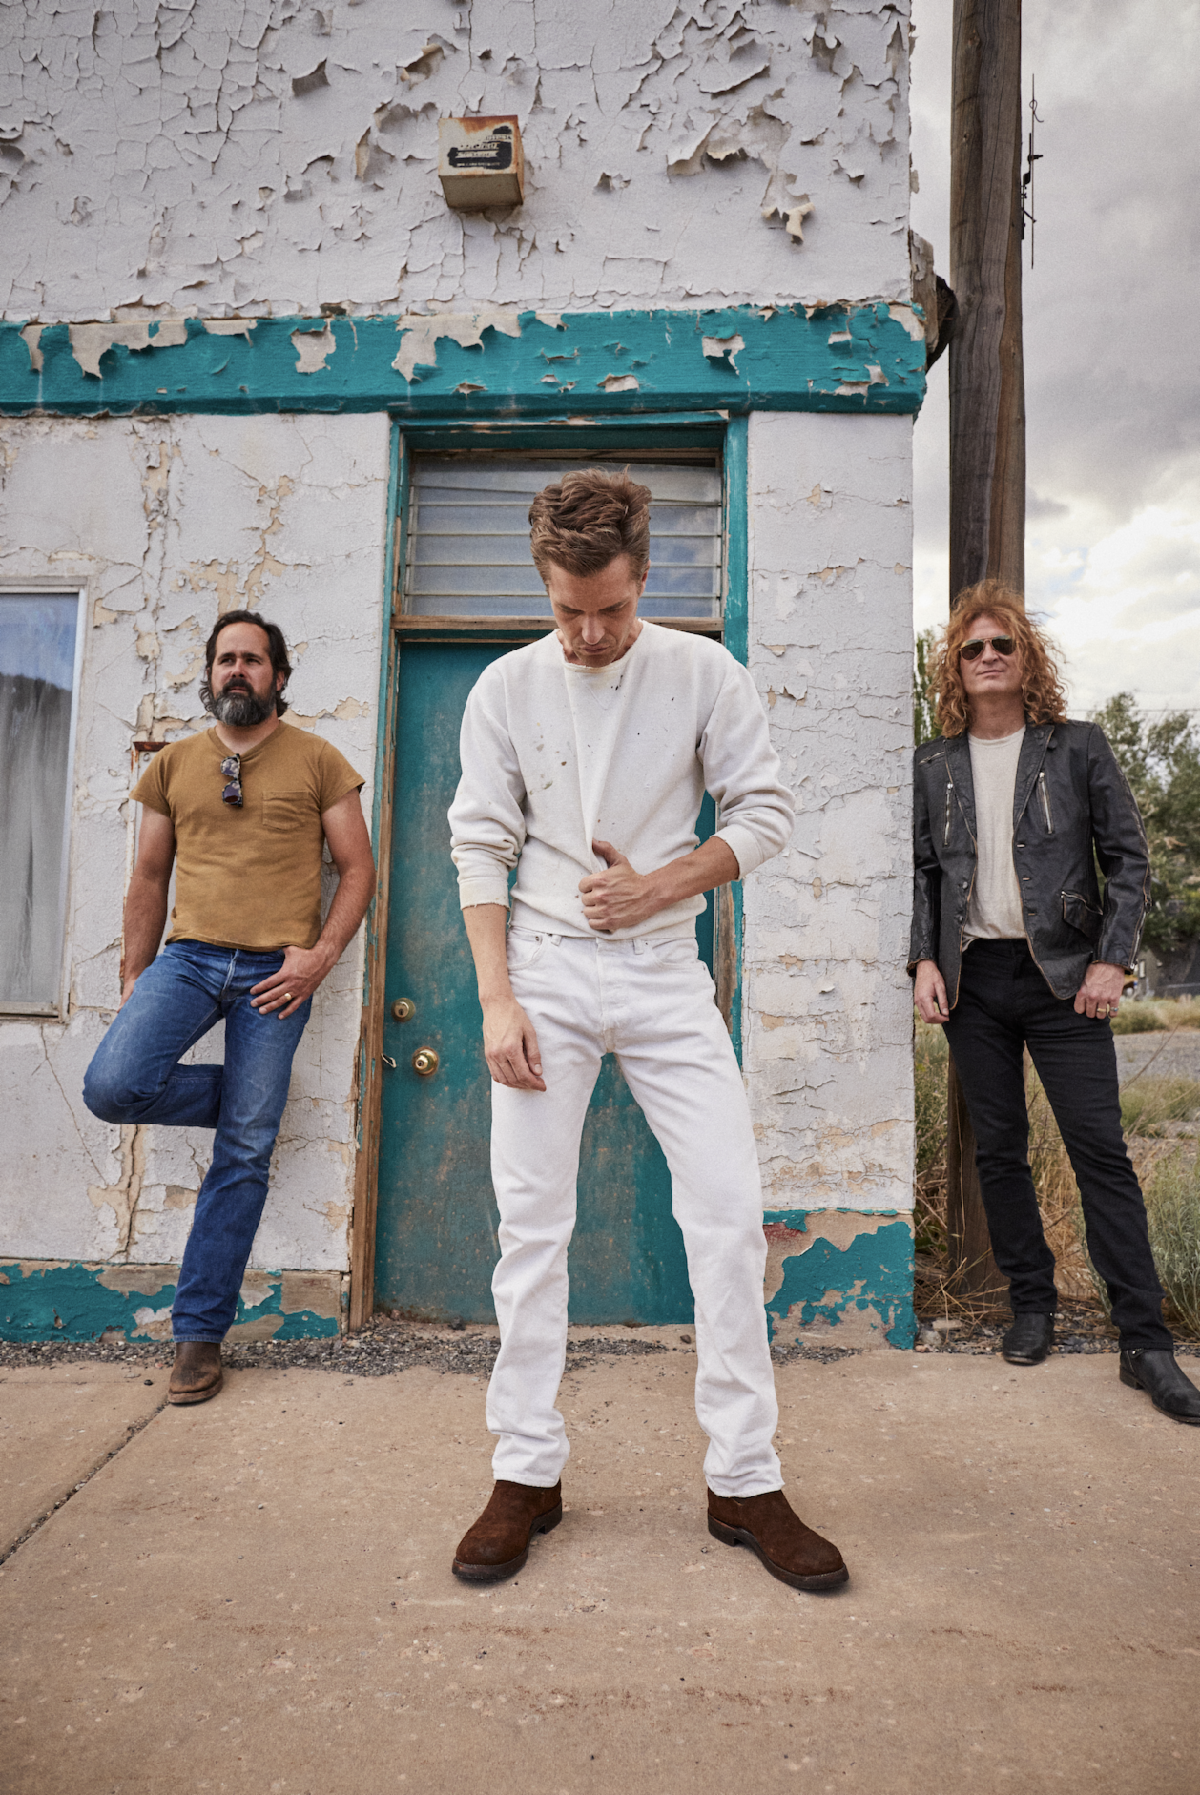 THE KILLERS TO RELEASE DELUXE EDITION OF PRESSURE MACHINE